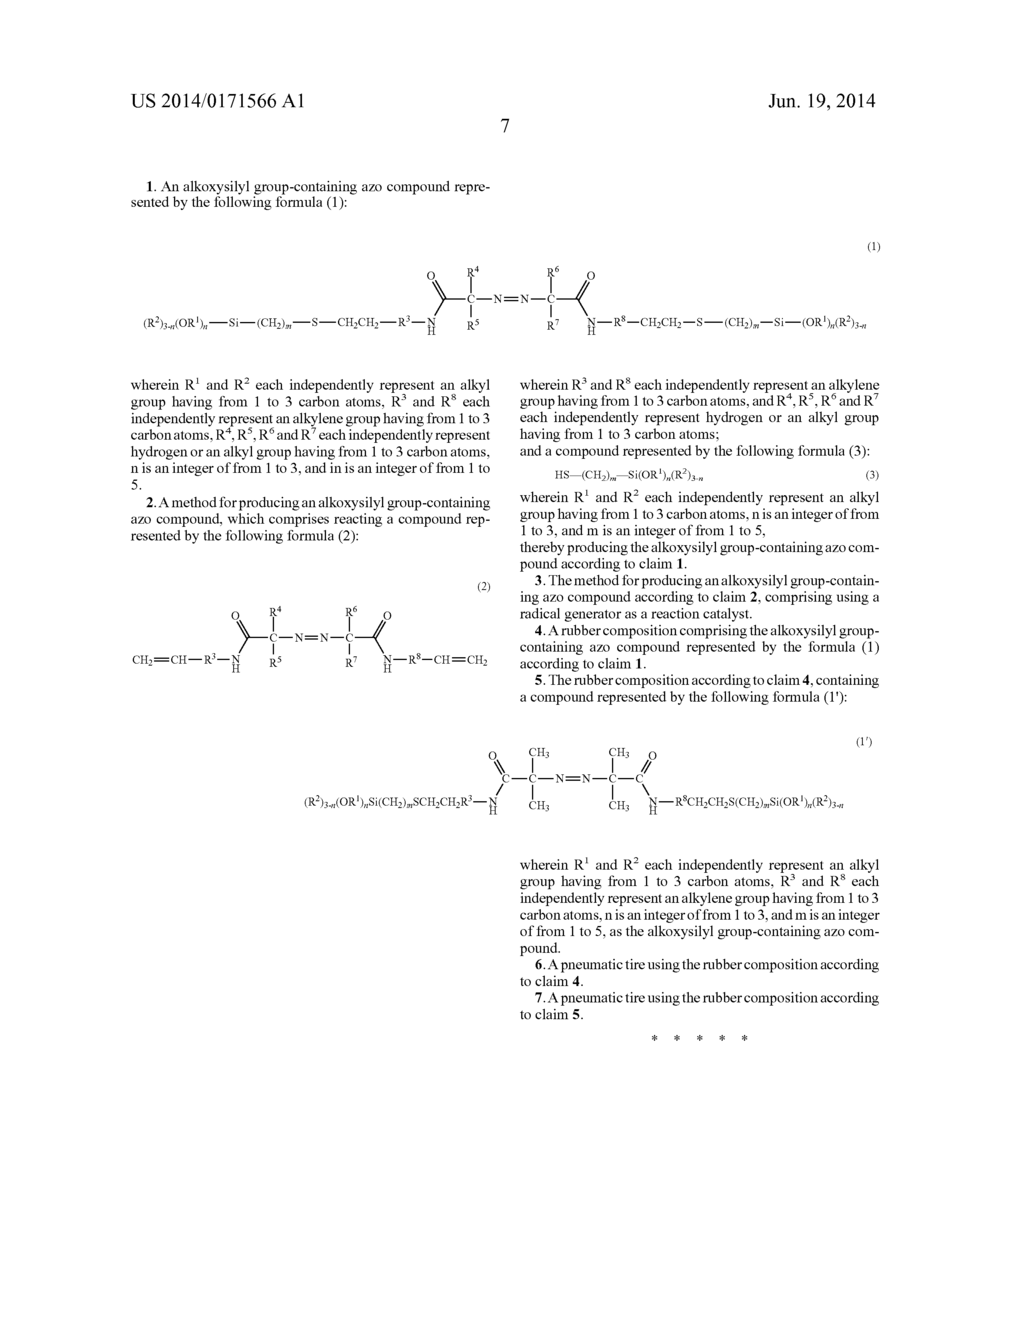 ALKOXYSILYL GROUP-CONTAINING AZO COMPOUND AND RUBBER COMPOSITION USING THE     SAME - diagram, schematic, and image 08